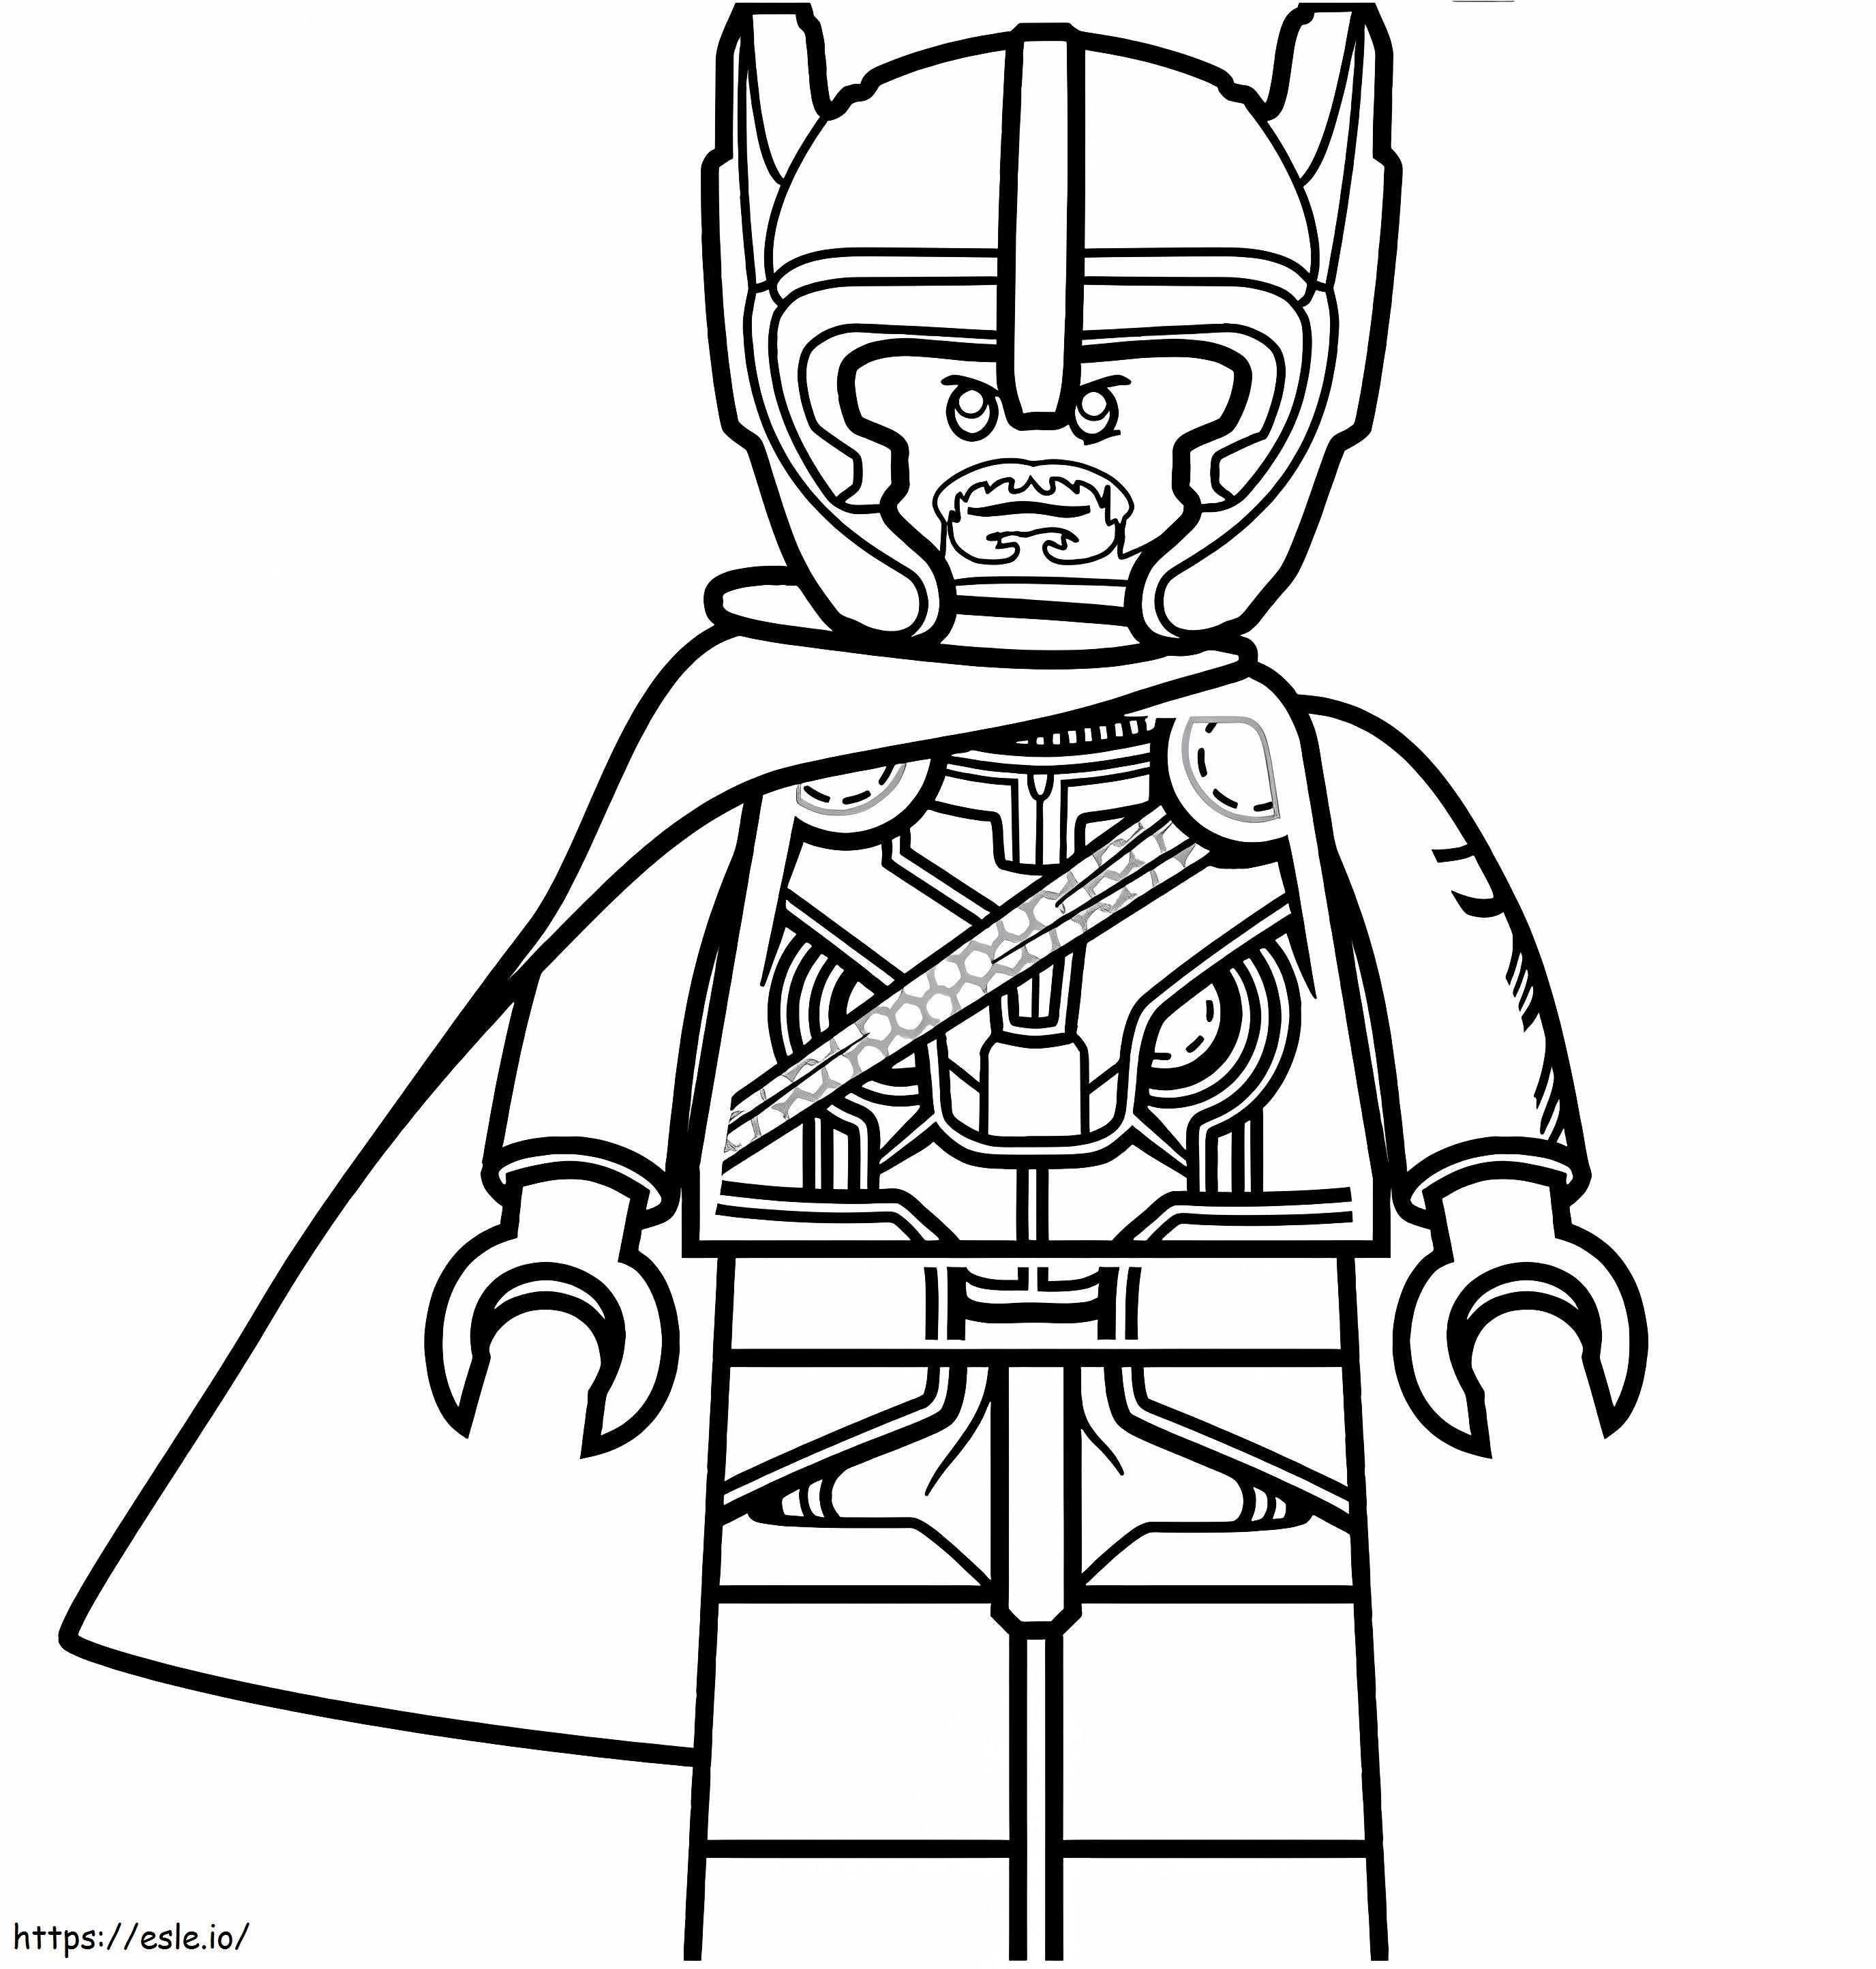 1546046622 Maxresdefault 1 coloring page